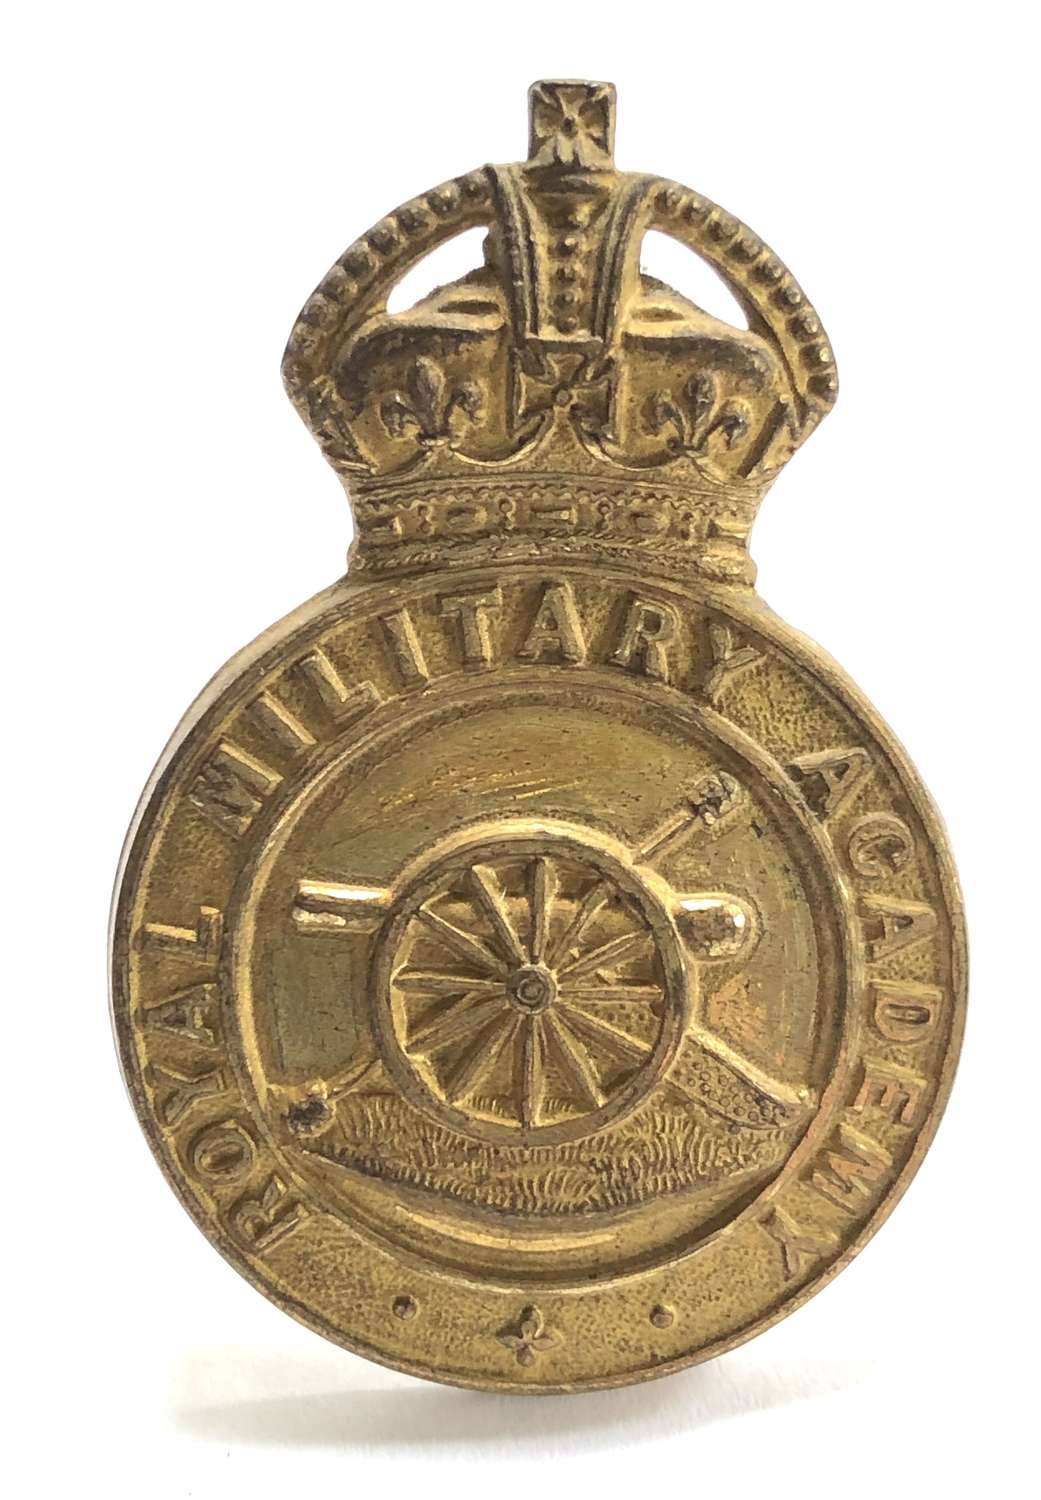 Royal Military Academy, Woolwich post 1901 cap badge